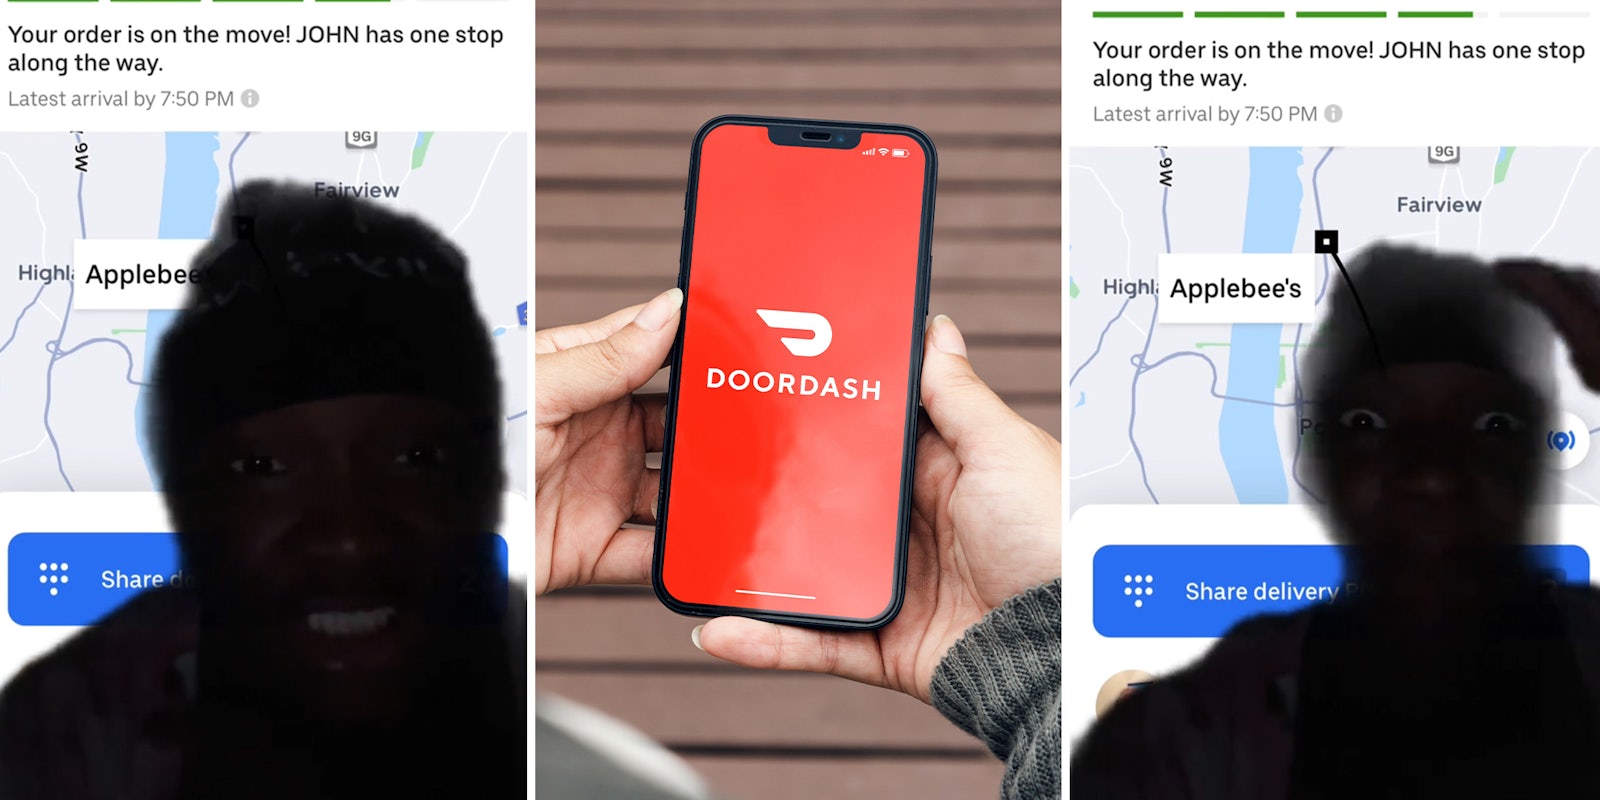 Customer demands DoorDash drivers stop picking up multiple orders along with theirs (working HED)